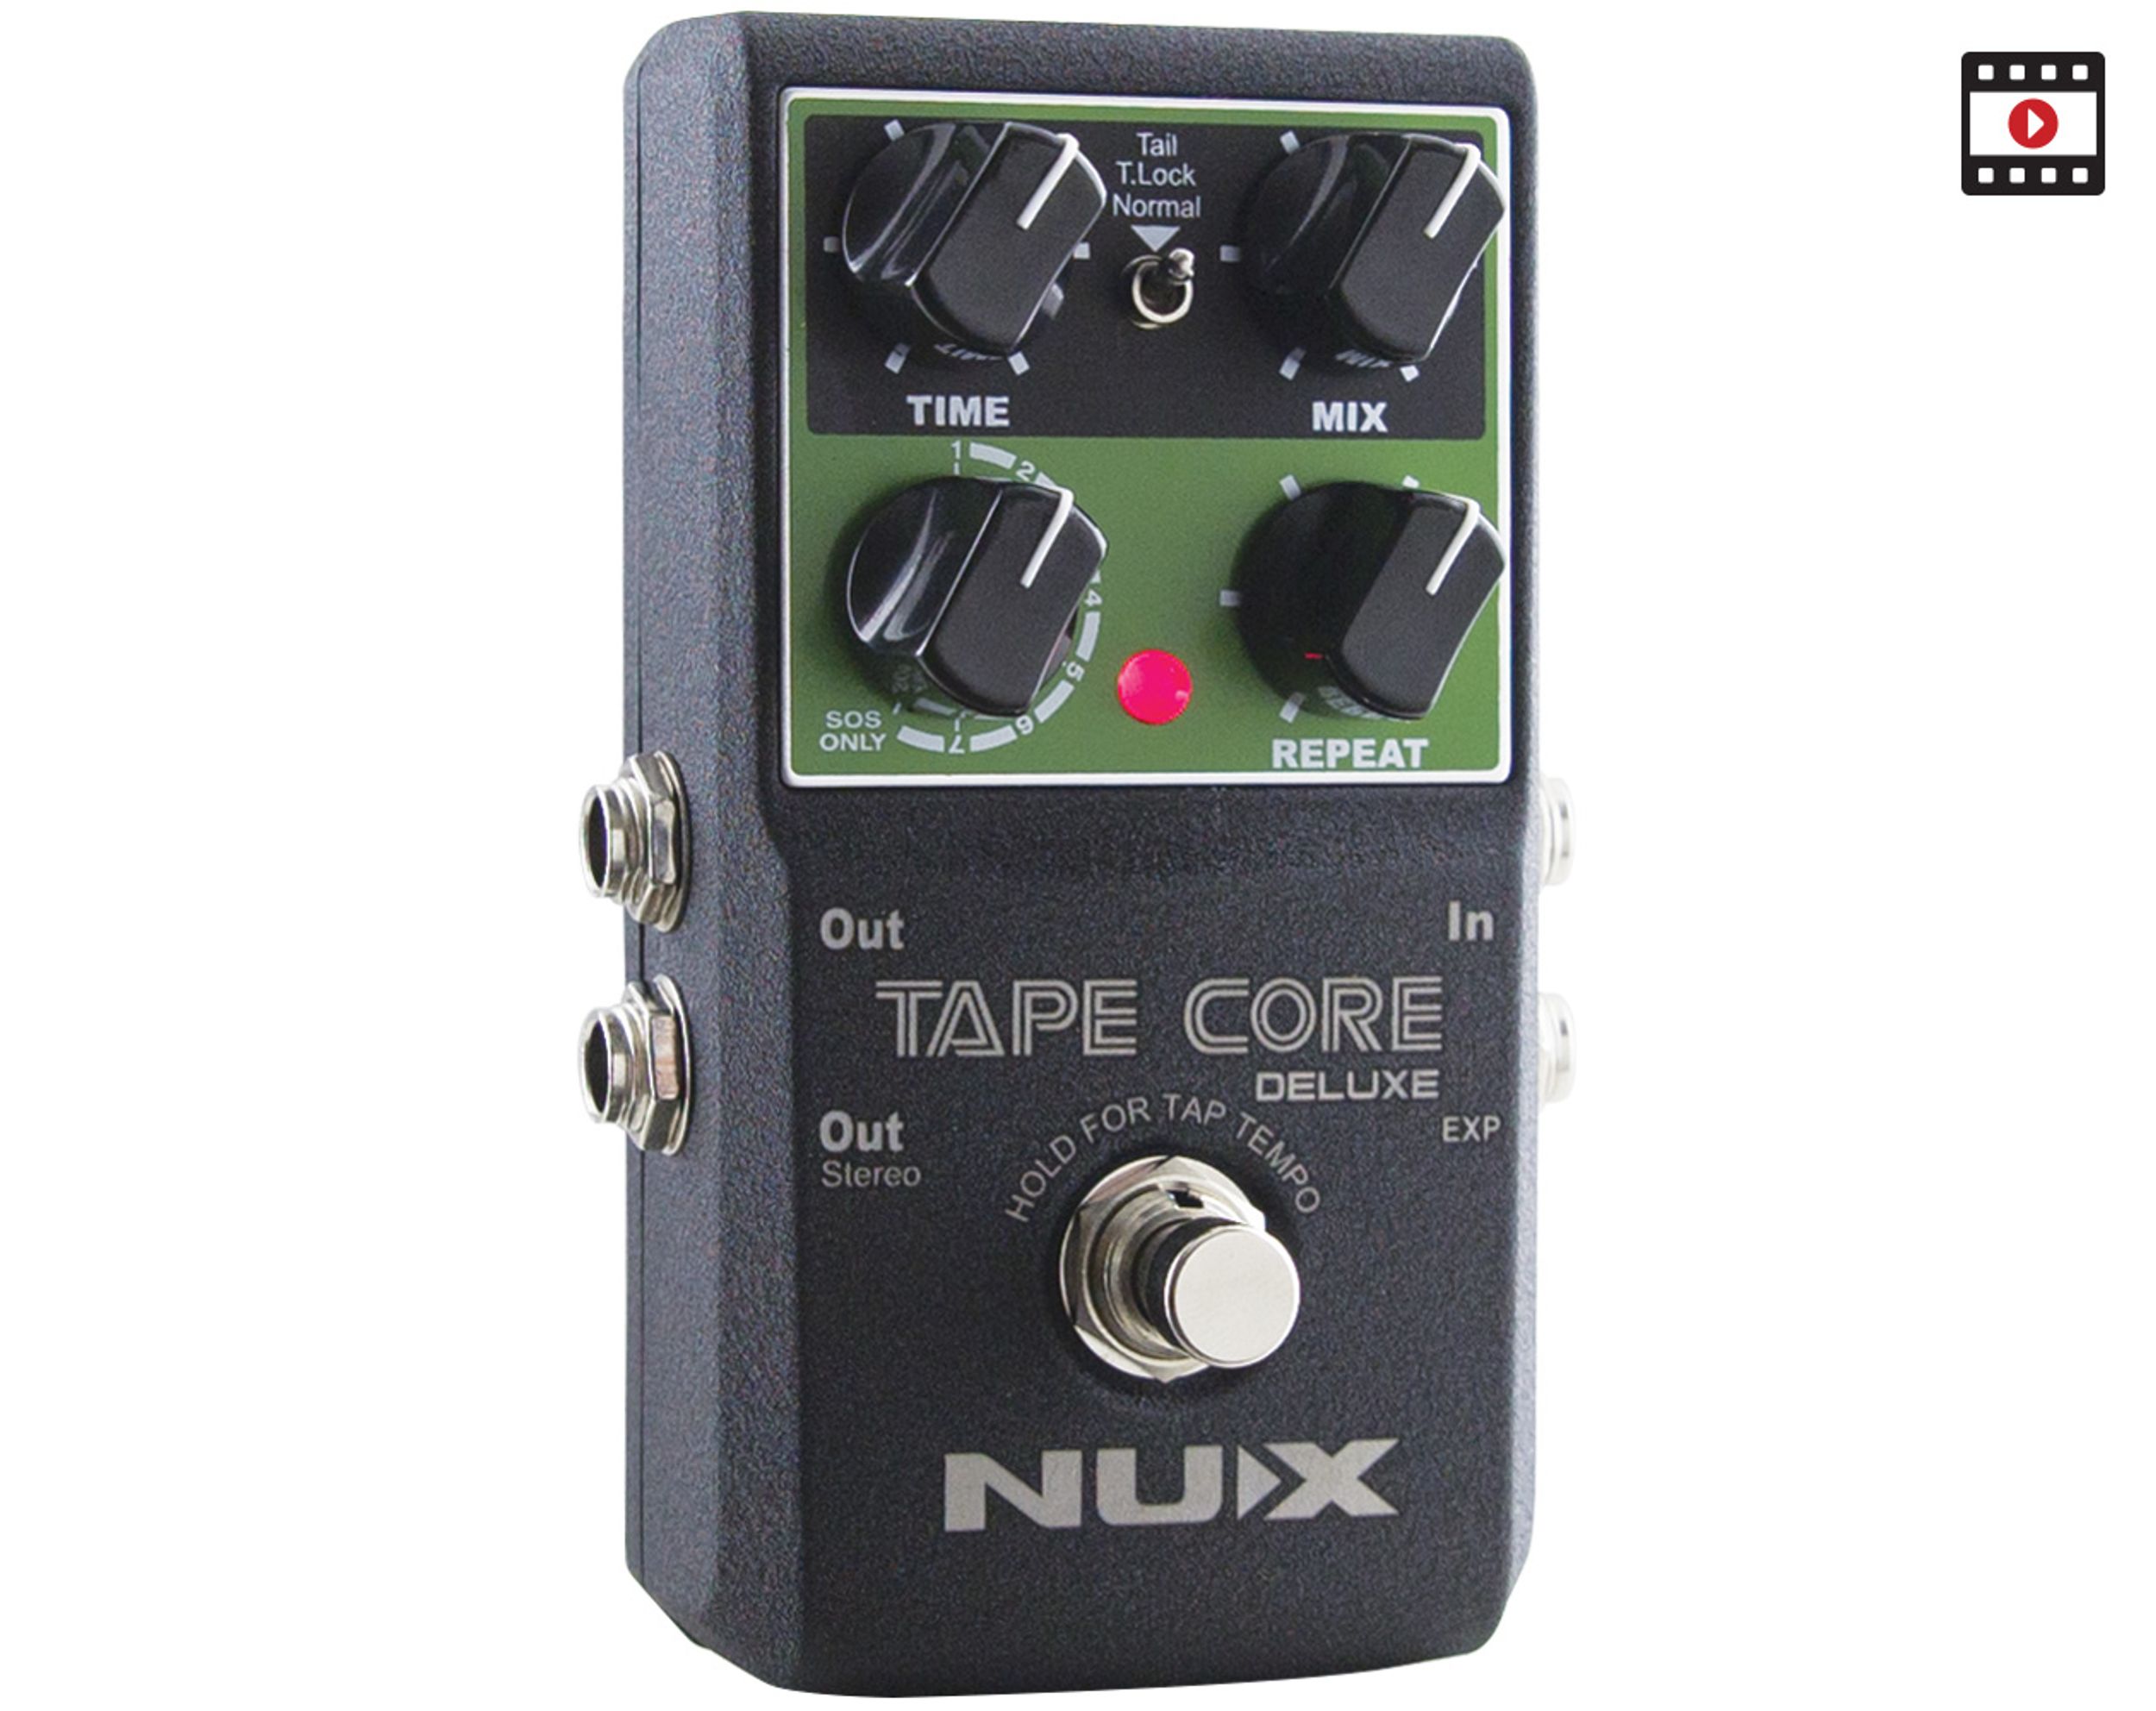 Nu-X Tape Core Deluxe Review